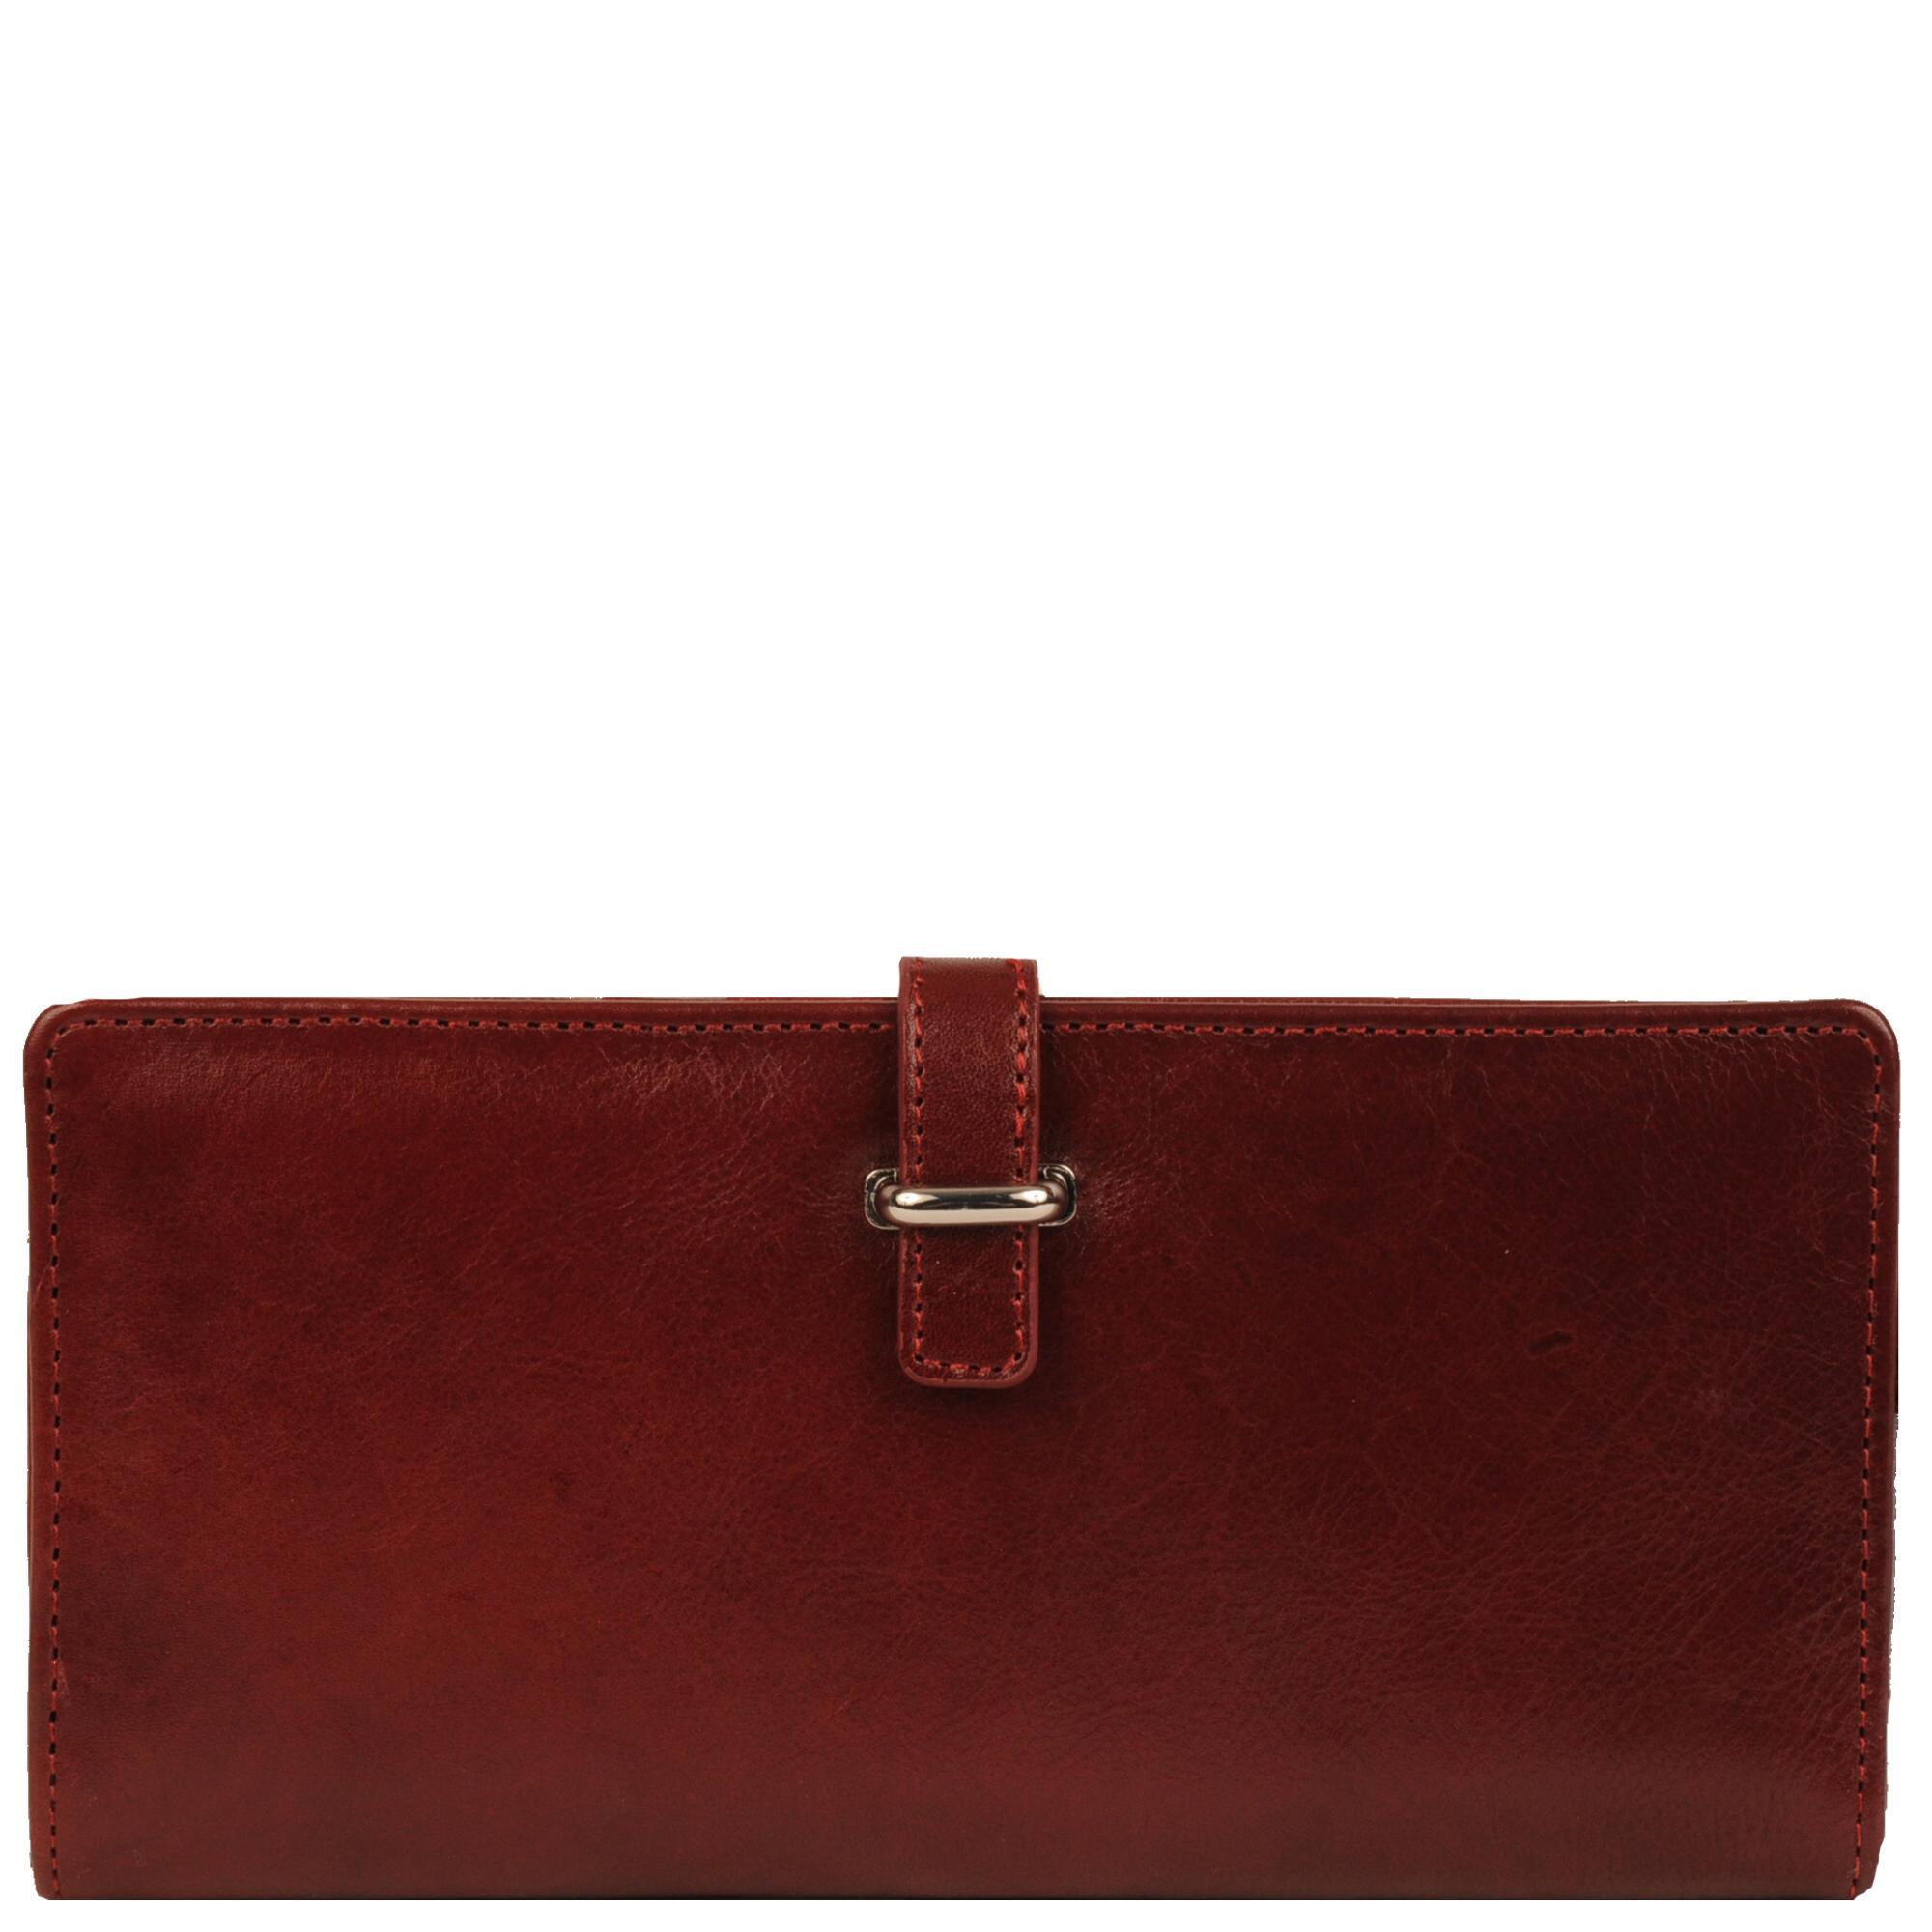 Wilsons Leather Roma Buckle Leather Card Case Wallet in Red - Lyst